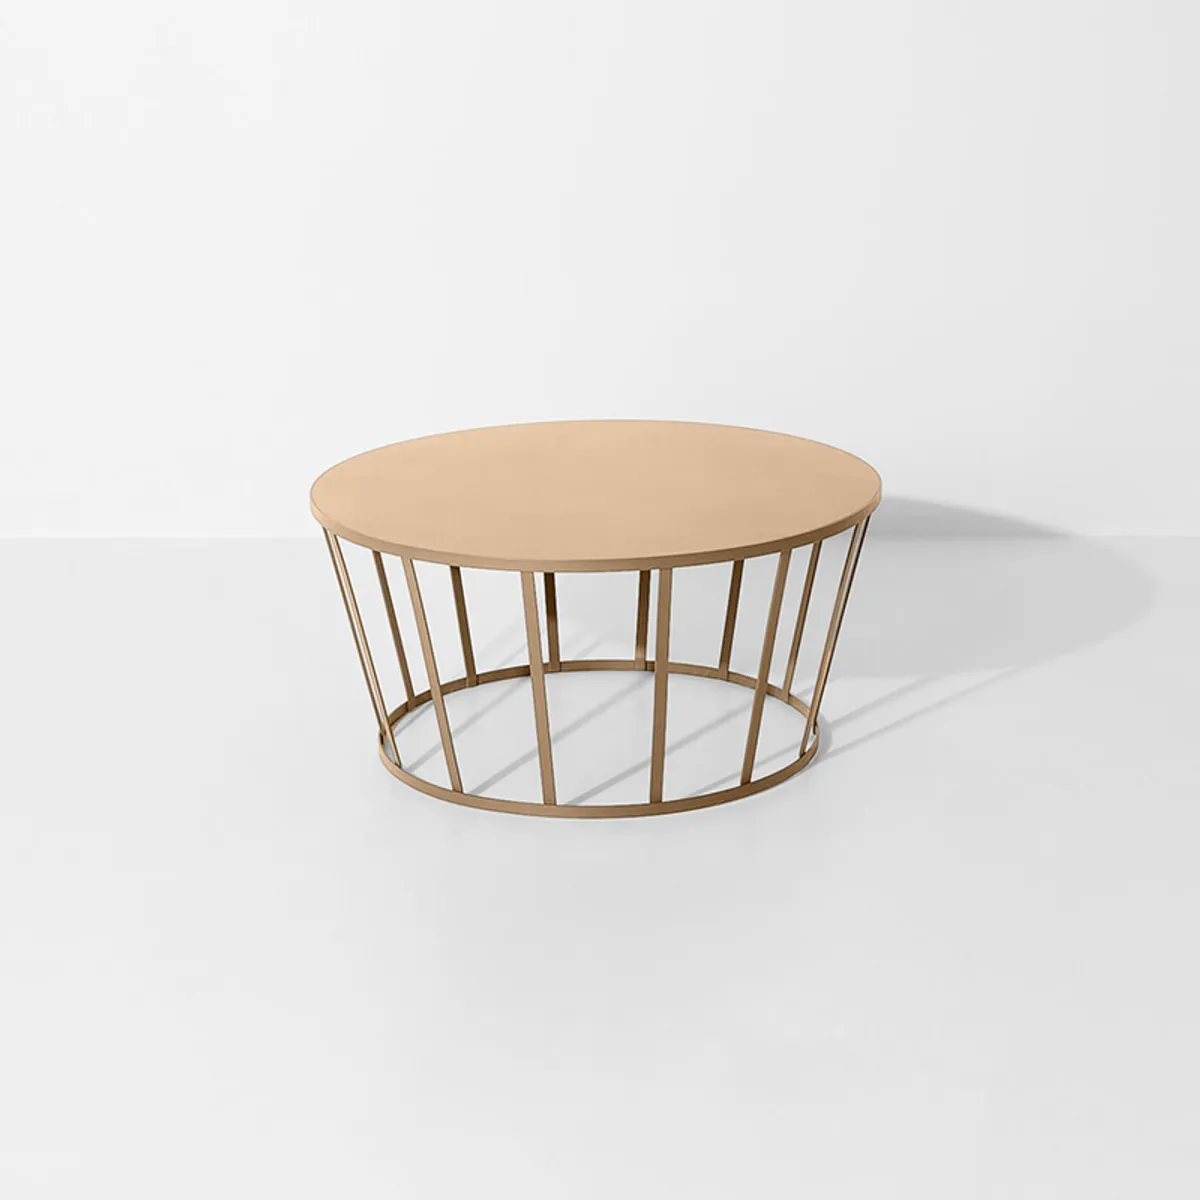 Hollo Coffee Table Gold Steel Metal Table For Outdoor Use In Hotels And Cafes By Insideoutcontracts